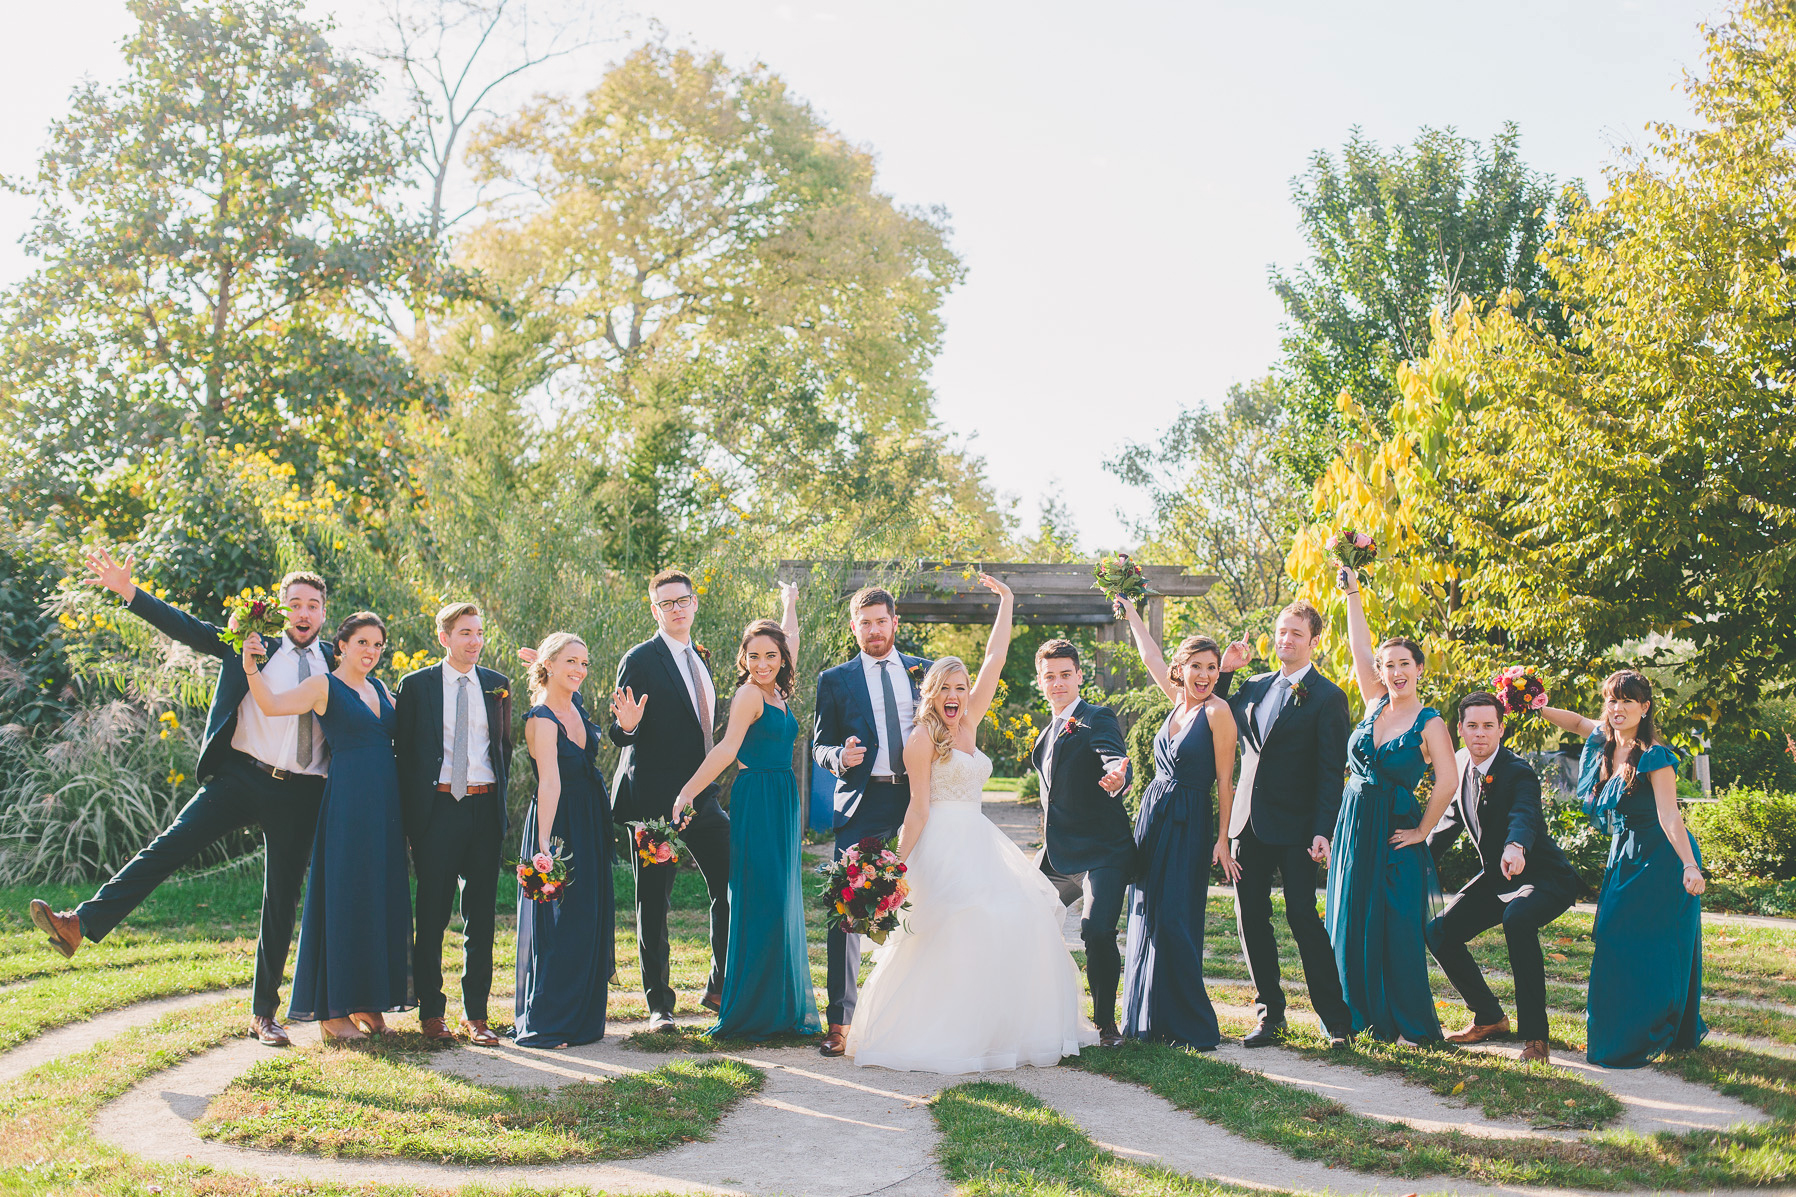 Fall wedding party outside with teal dresses, orange ranunculus boutonnières, and bouquet with red, pink, plum, and bright yellow.